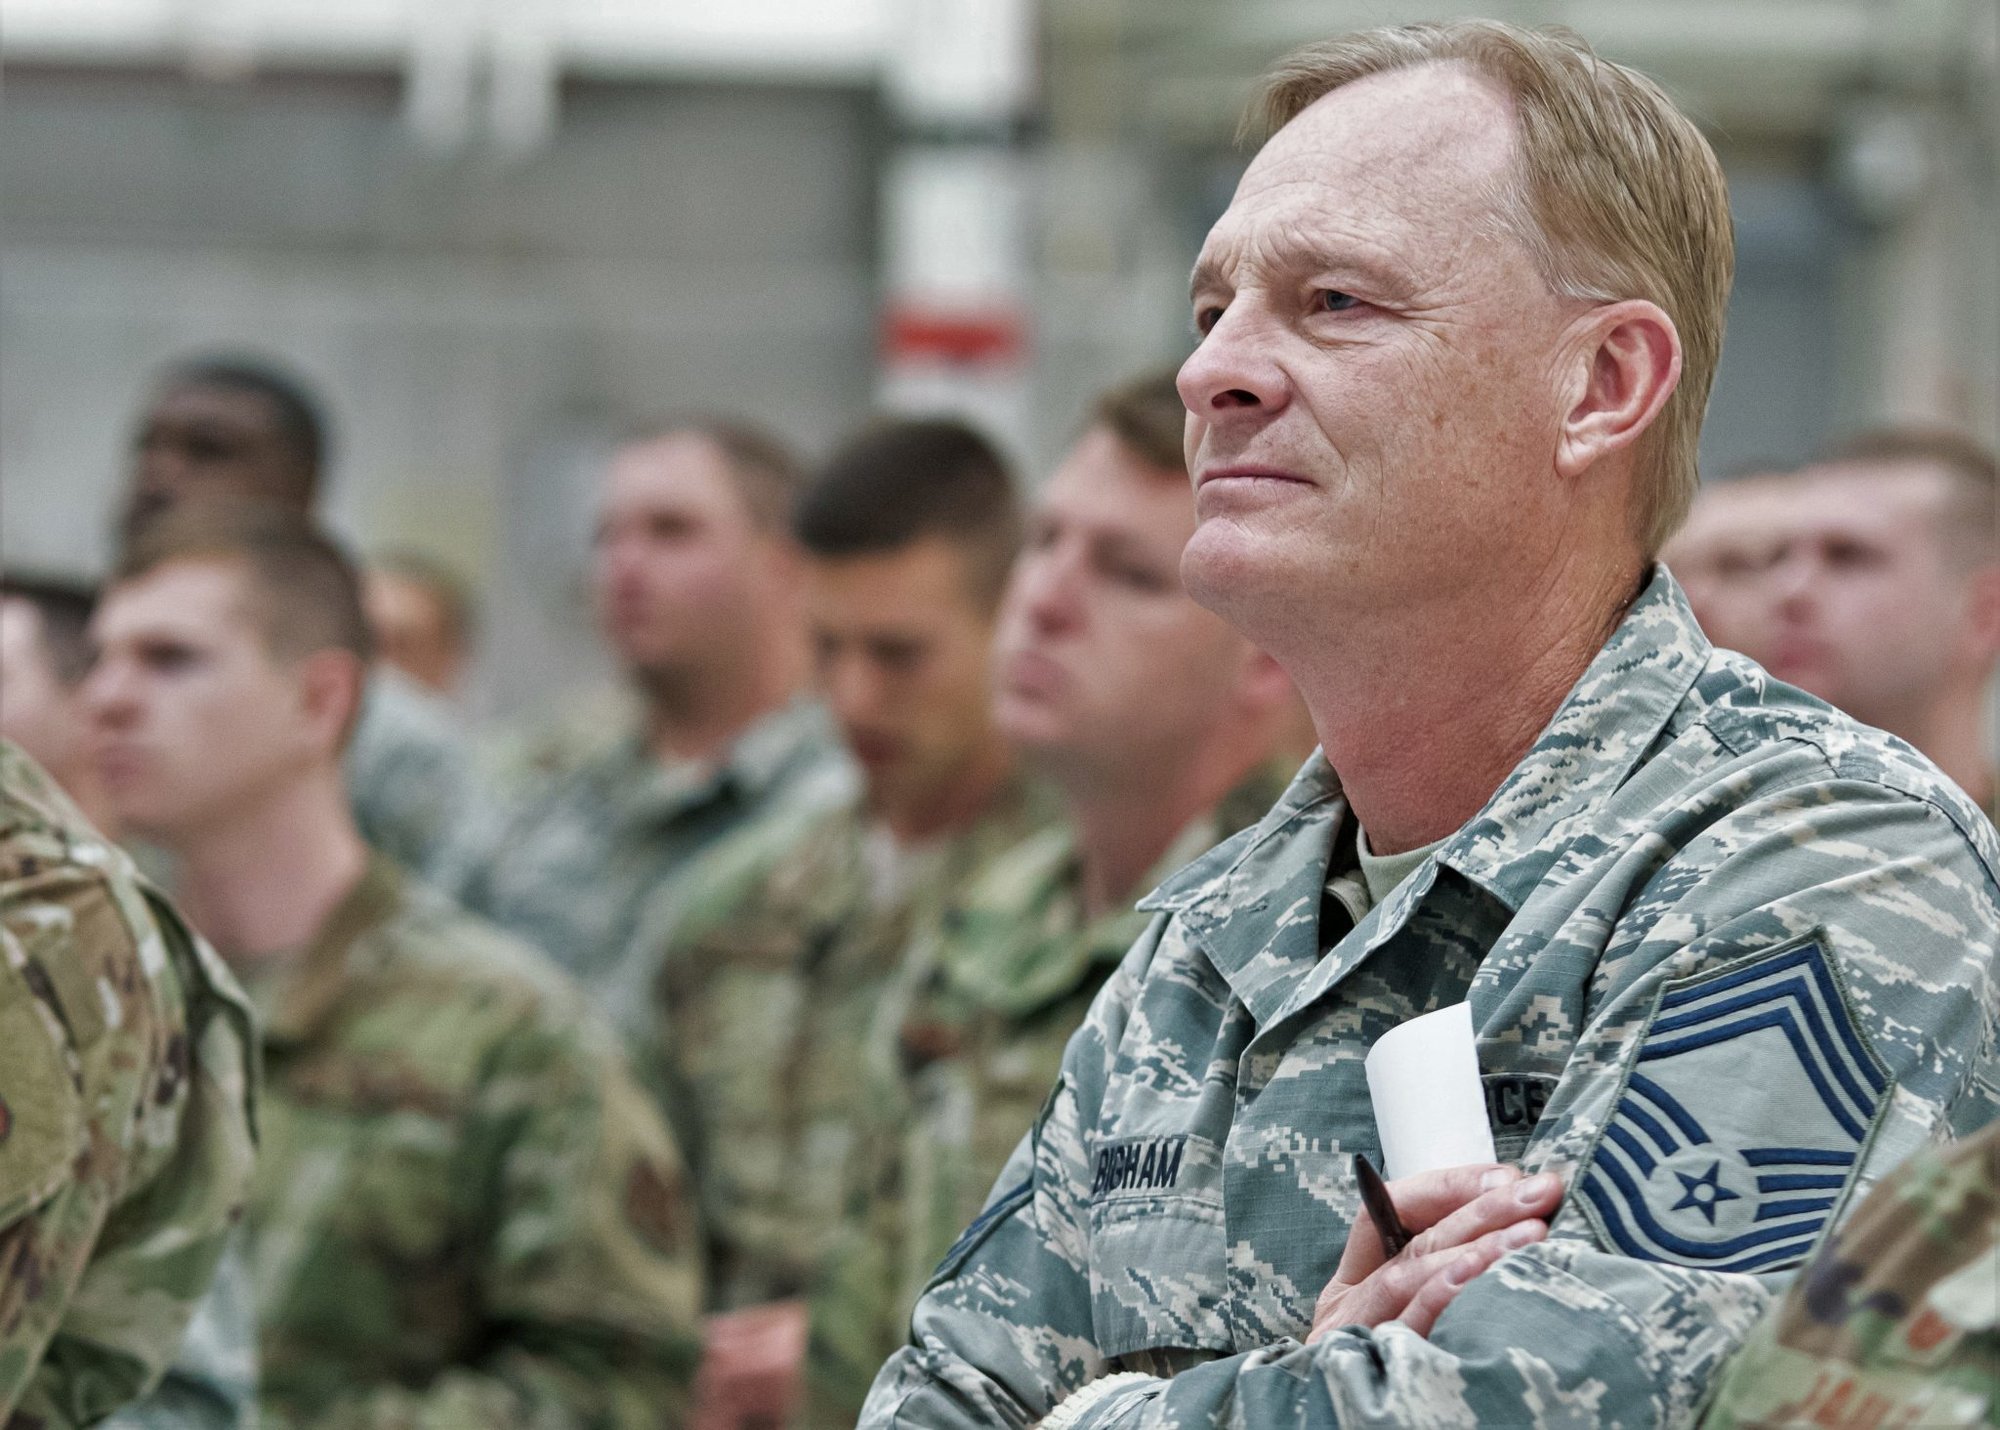 Chief Master Sgt. John Bigham, a Missouri Air National Guard maintenance superintendent with the 139th Airlift Wing, listens to a speaker during a “Resilience Tactical Pause” day at Rosecrans Air National Guard Base, St. Joseph, Missouri. The event was focused on personal resiliency and suicide prevention. The Department of Defense’s 2019 Annual Suicide Report indicates suicide rates in the National Guard are lower, but more must be done to address the problem, insist senior National Guard officials. Photo by Tech. Sgt. Patrick Evenson